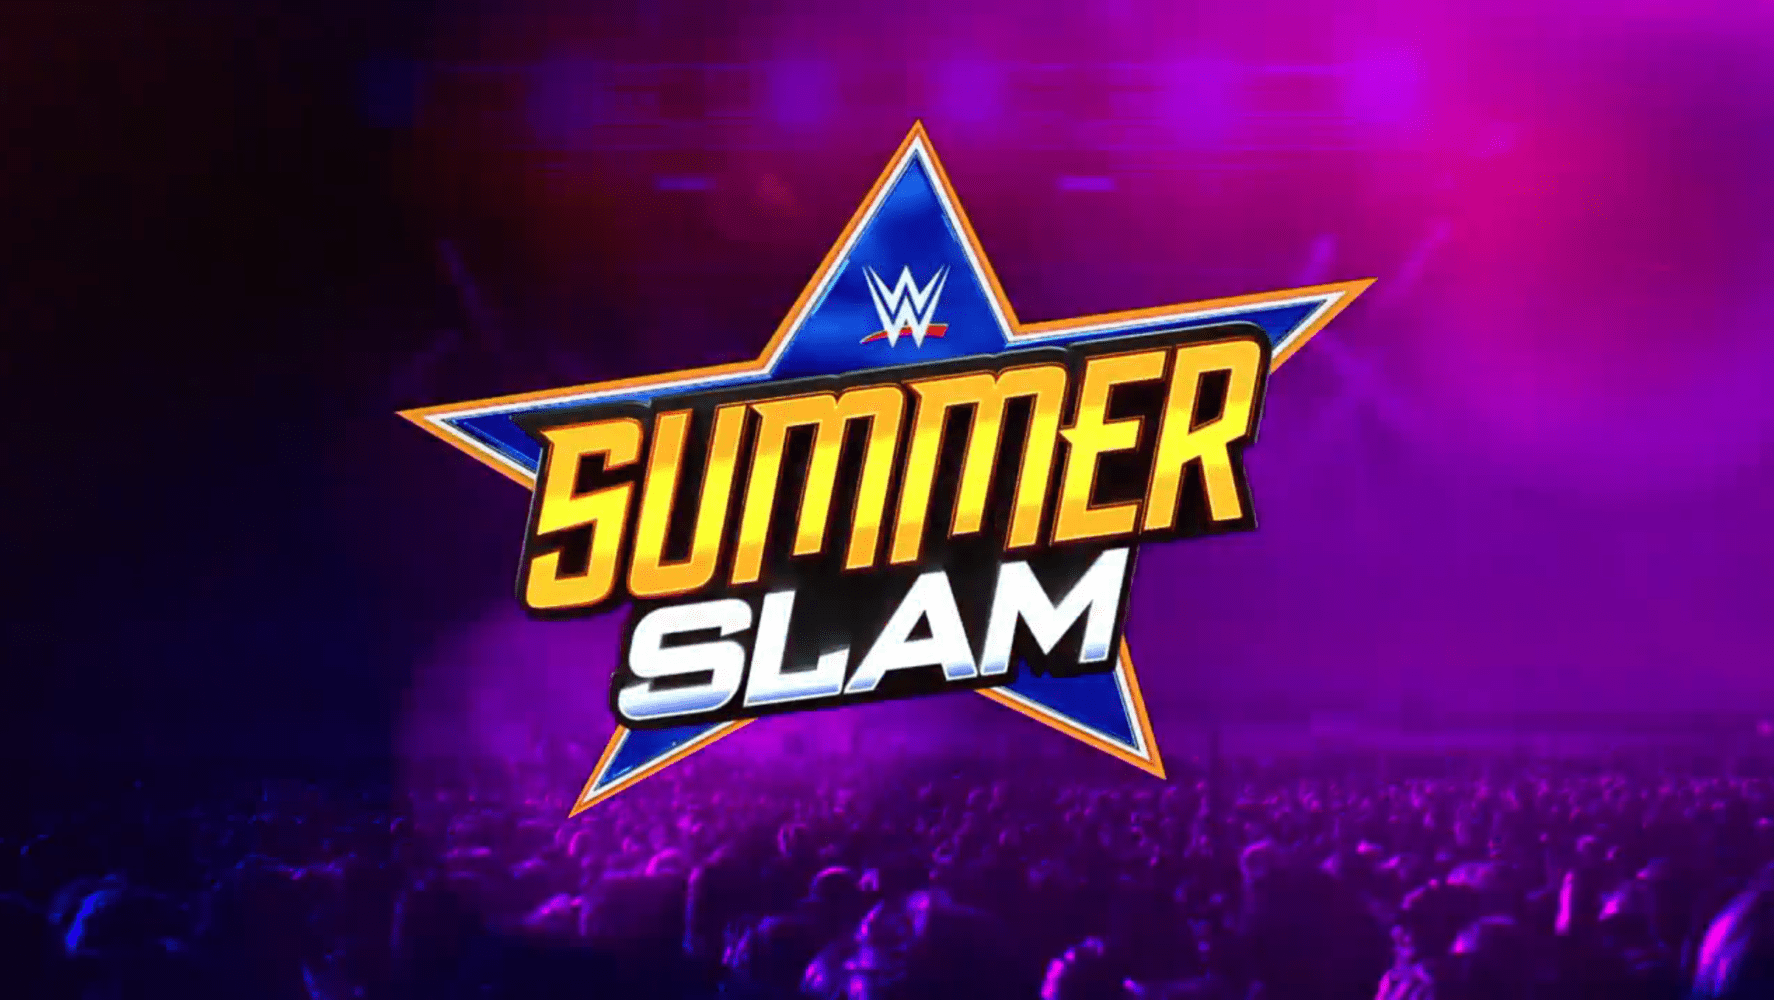 wwe-announces-new-match-for-summerslam-updated-card